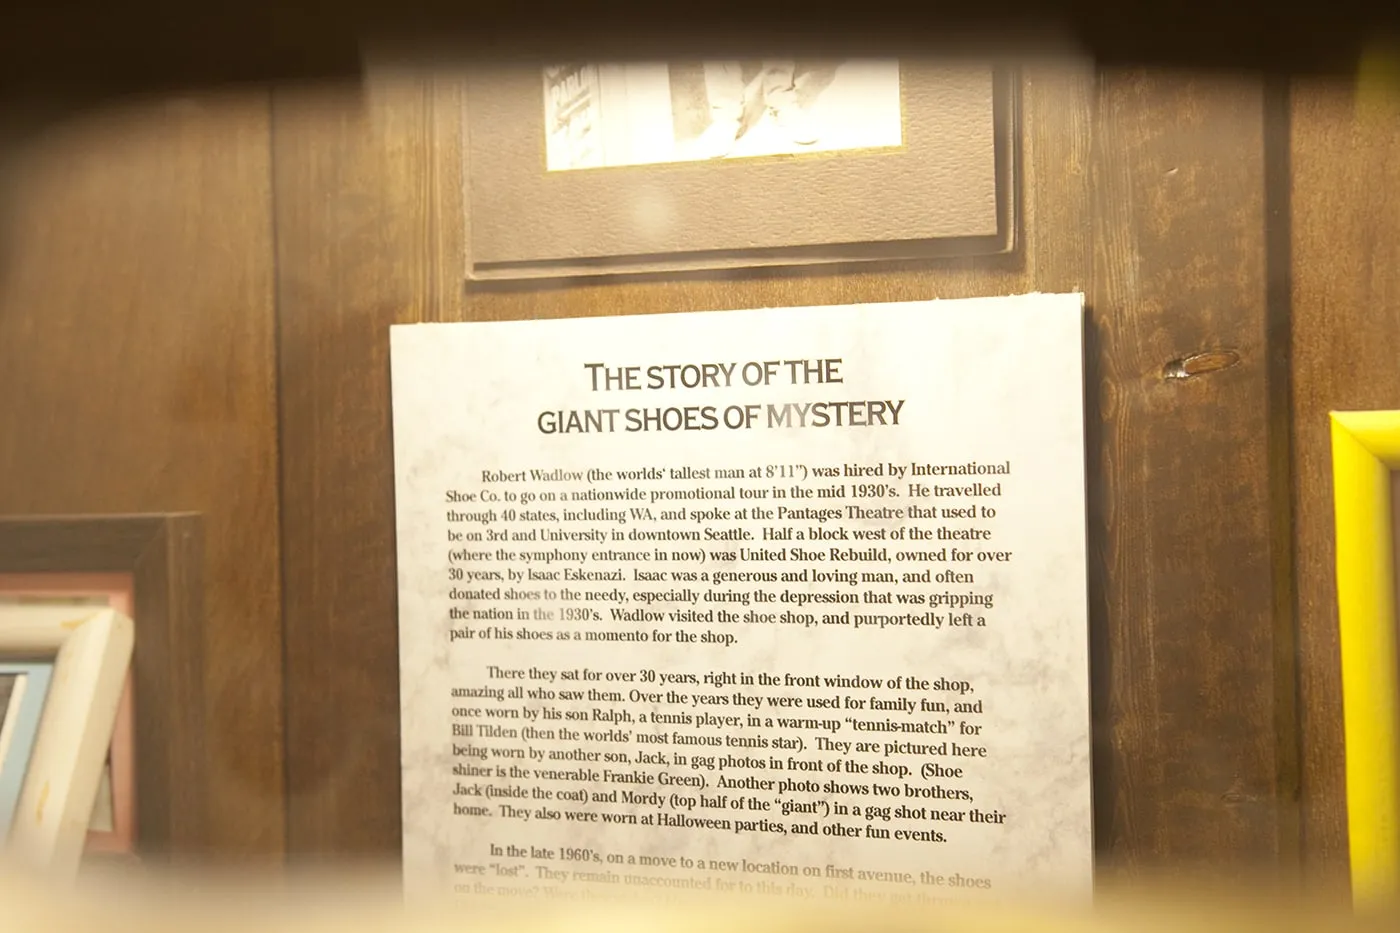 The story of the giant shoes of mystery at The World Famous Giant Shoe Museum in Pike Place Market in Seattle, Washington.